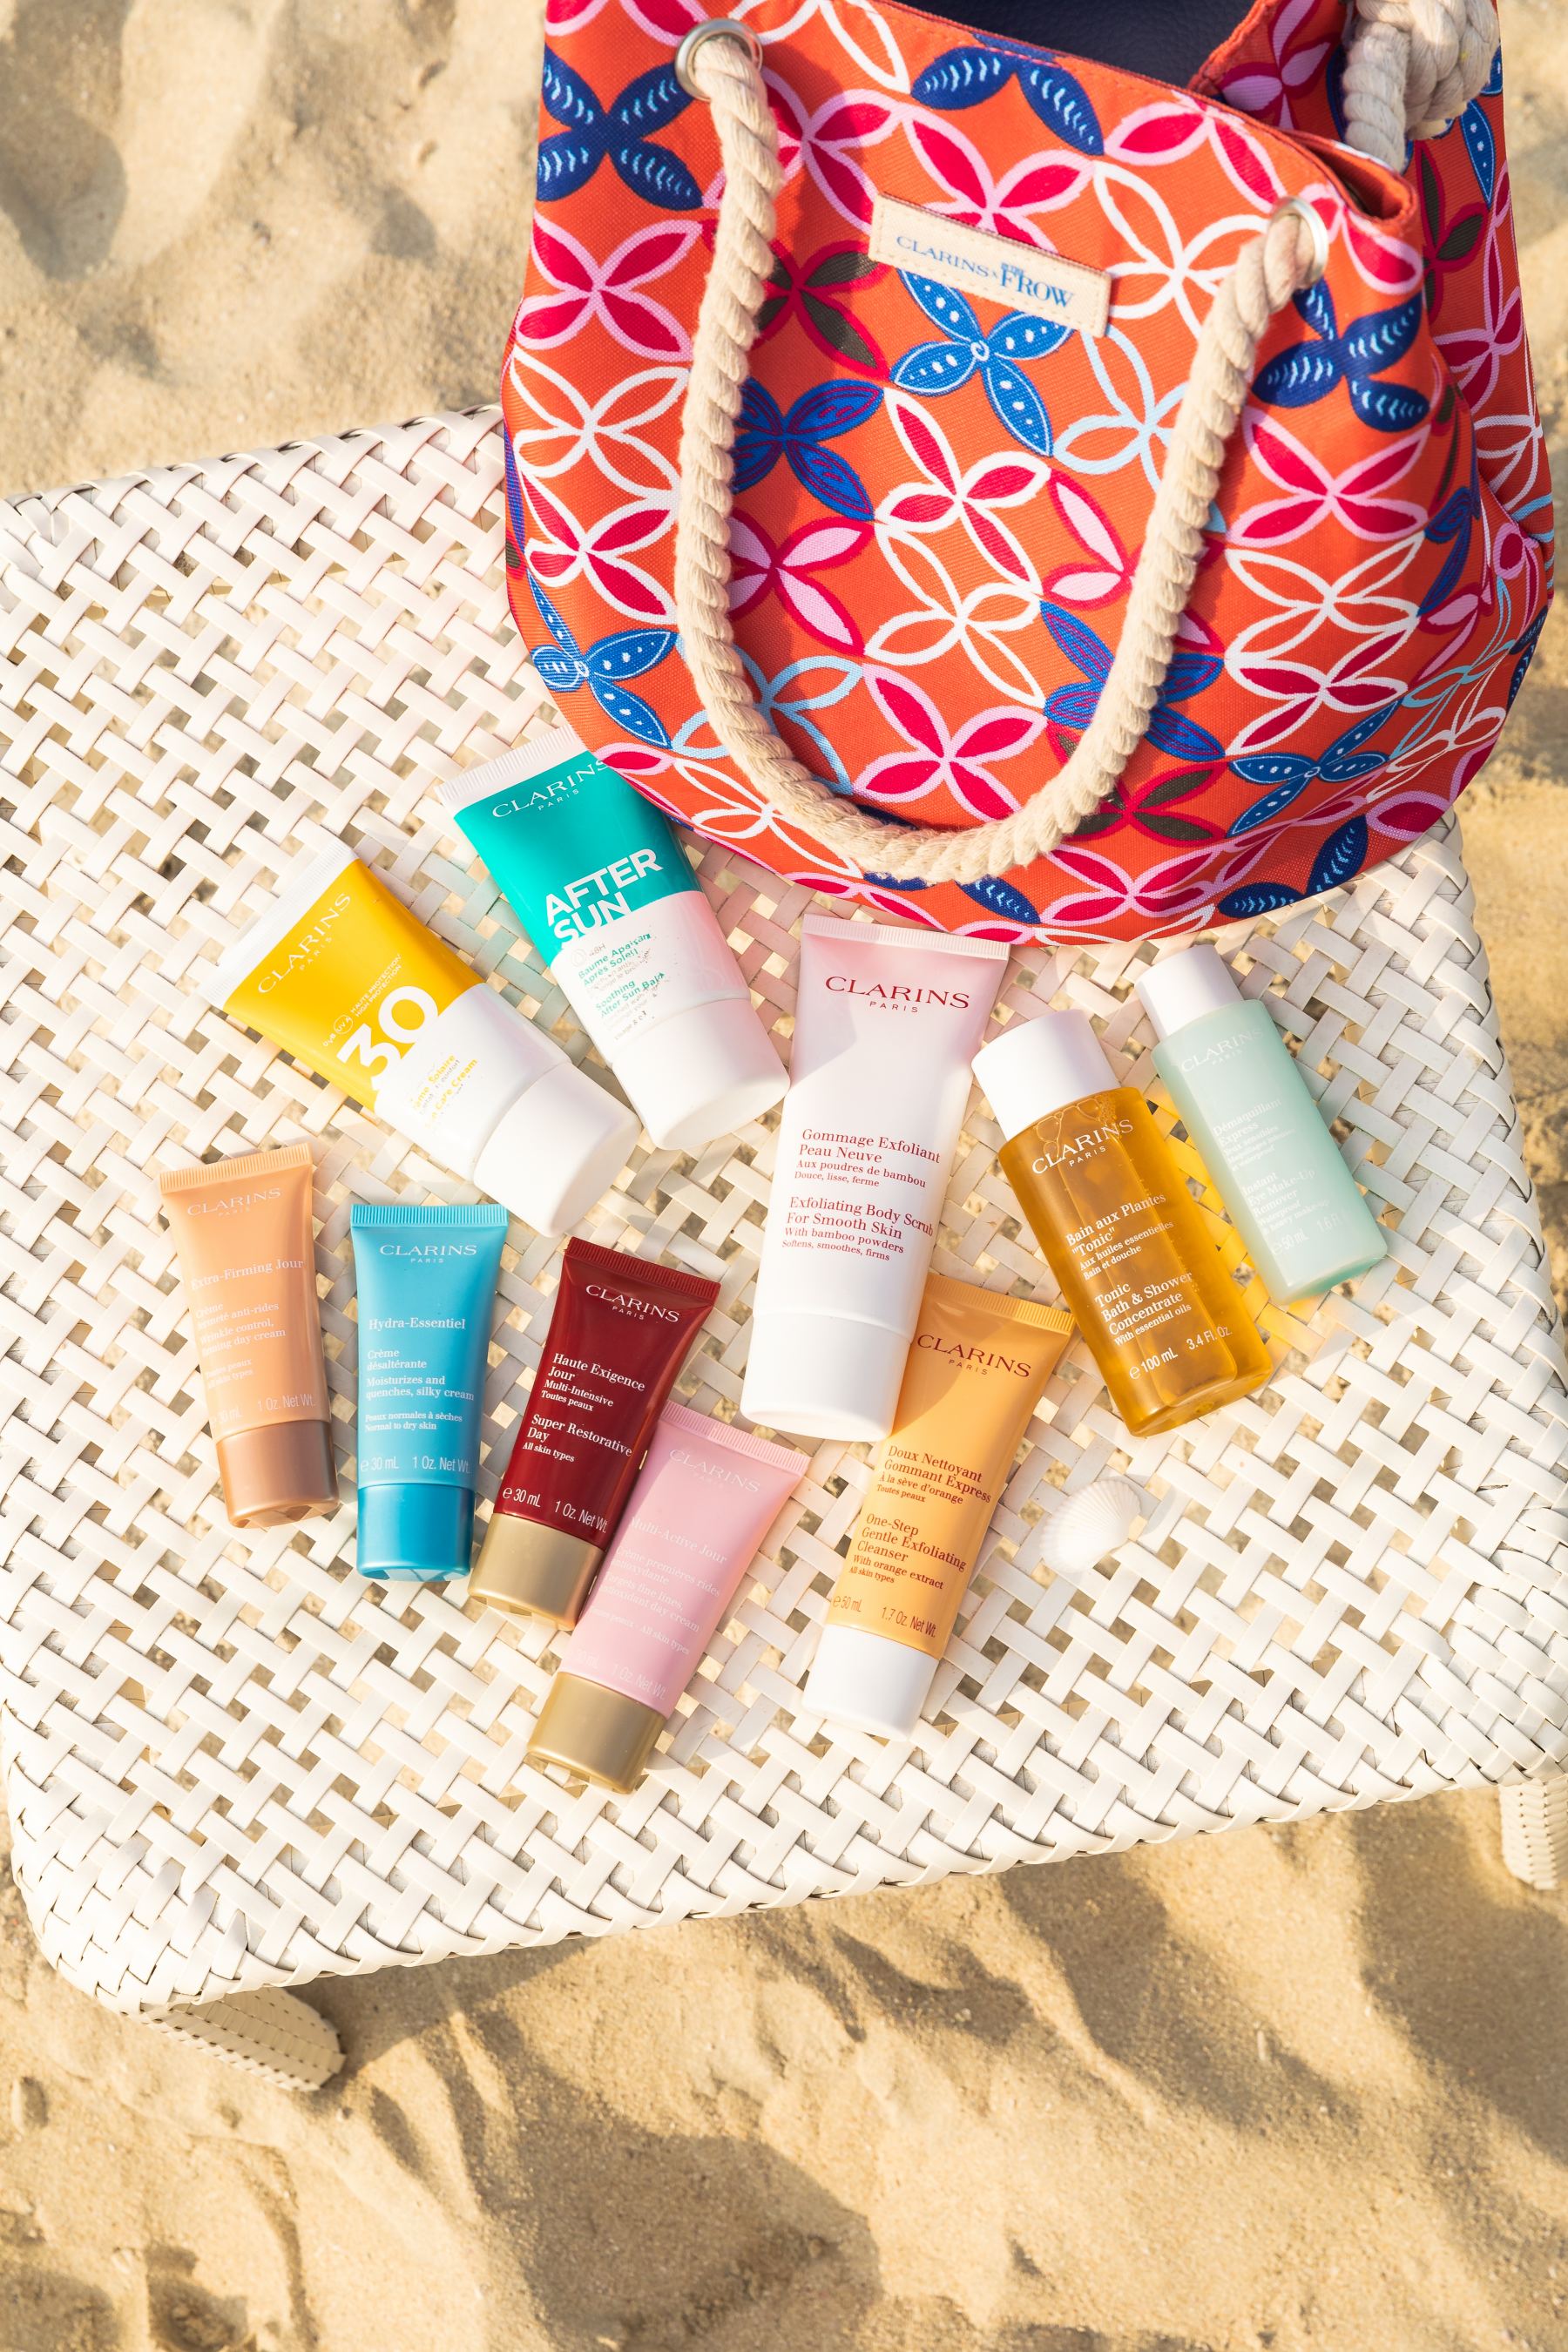 Barry Diplomat Foresight The Clarins x Inthefrow Summer Tote Bag: Summer Announcement!